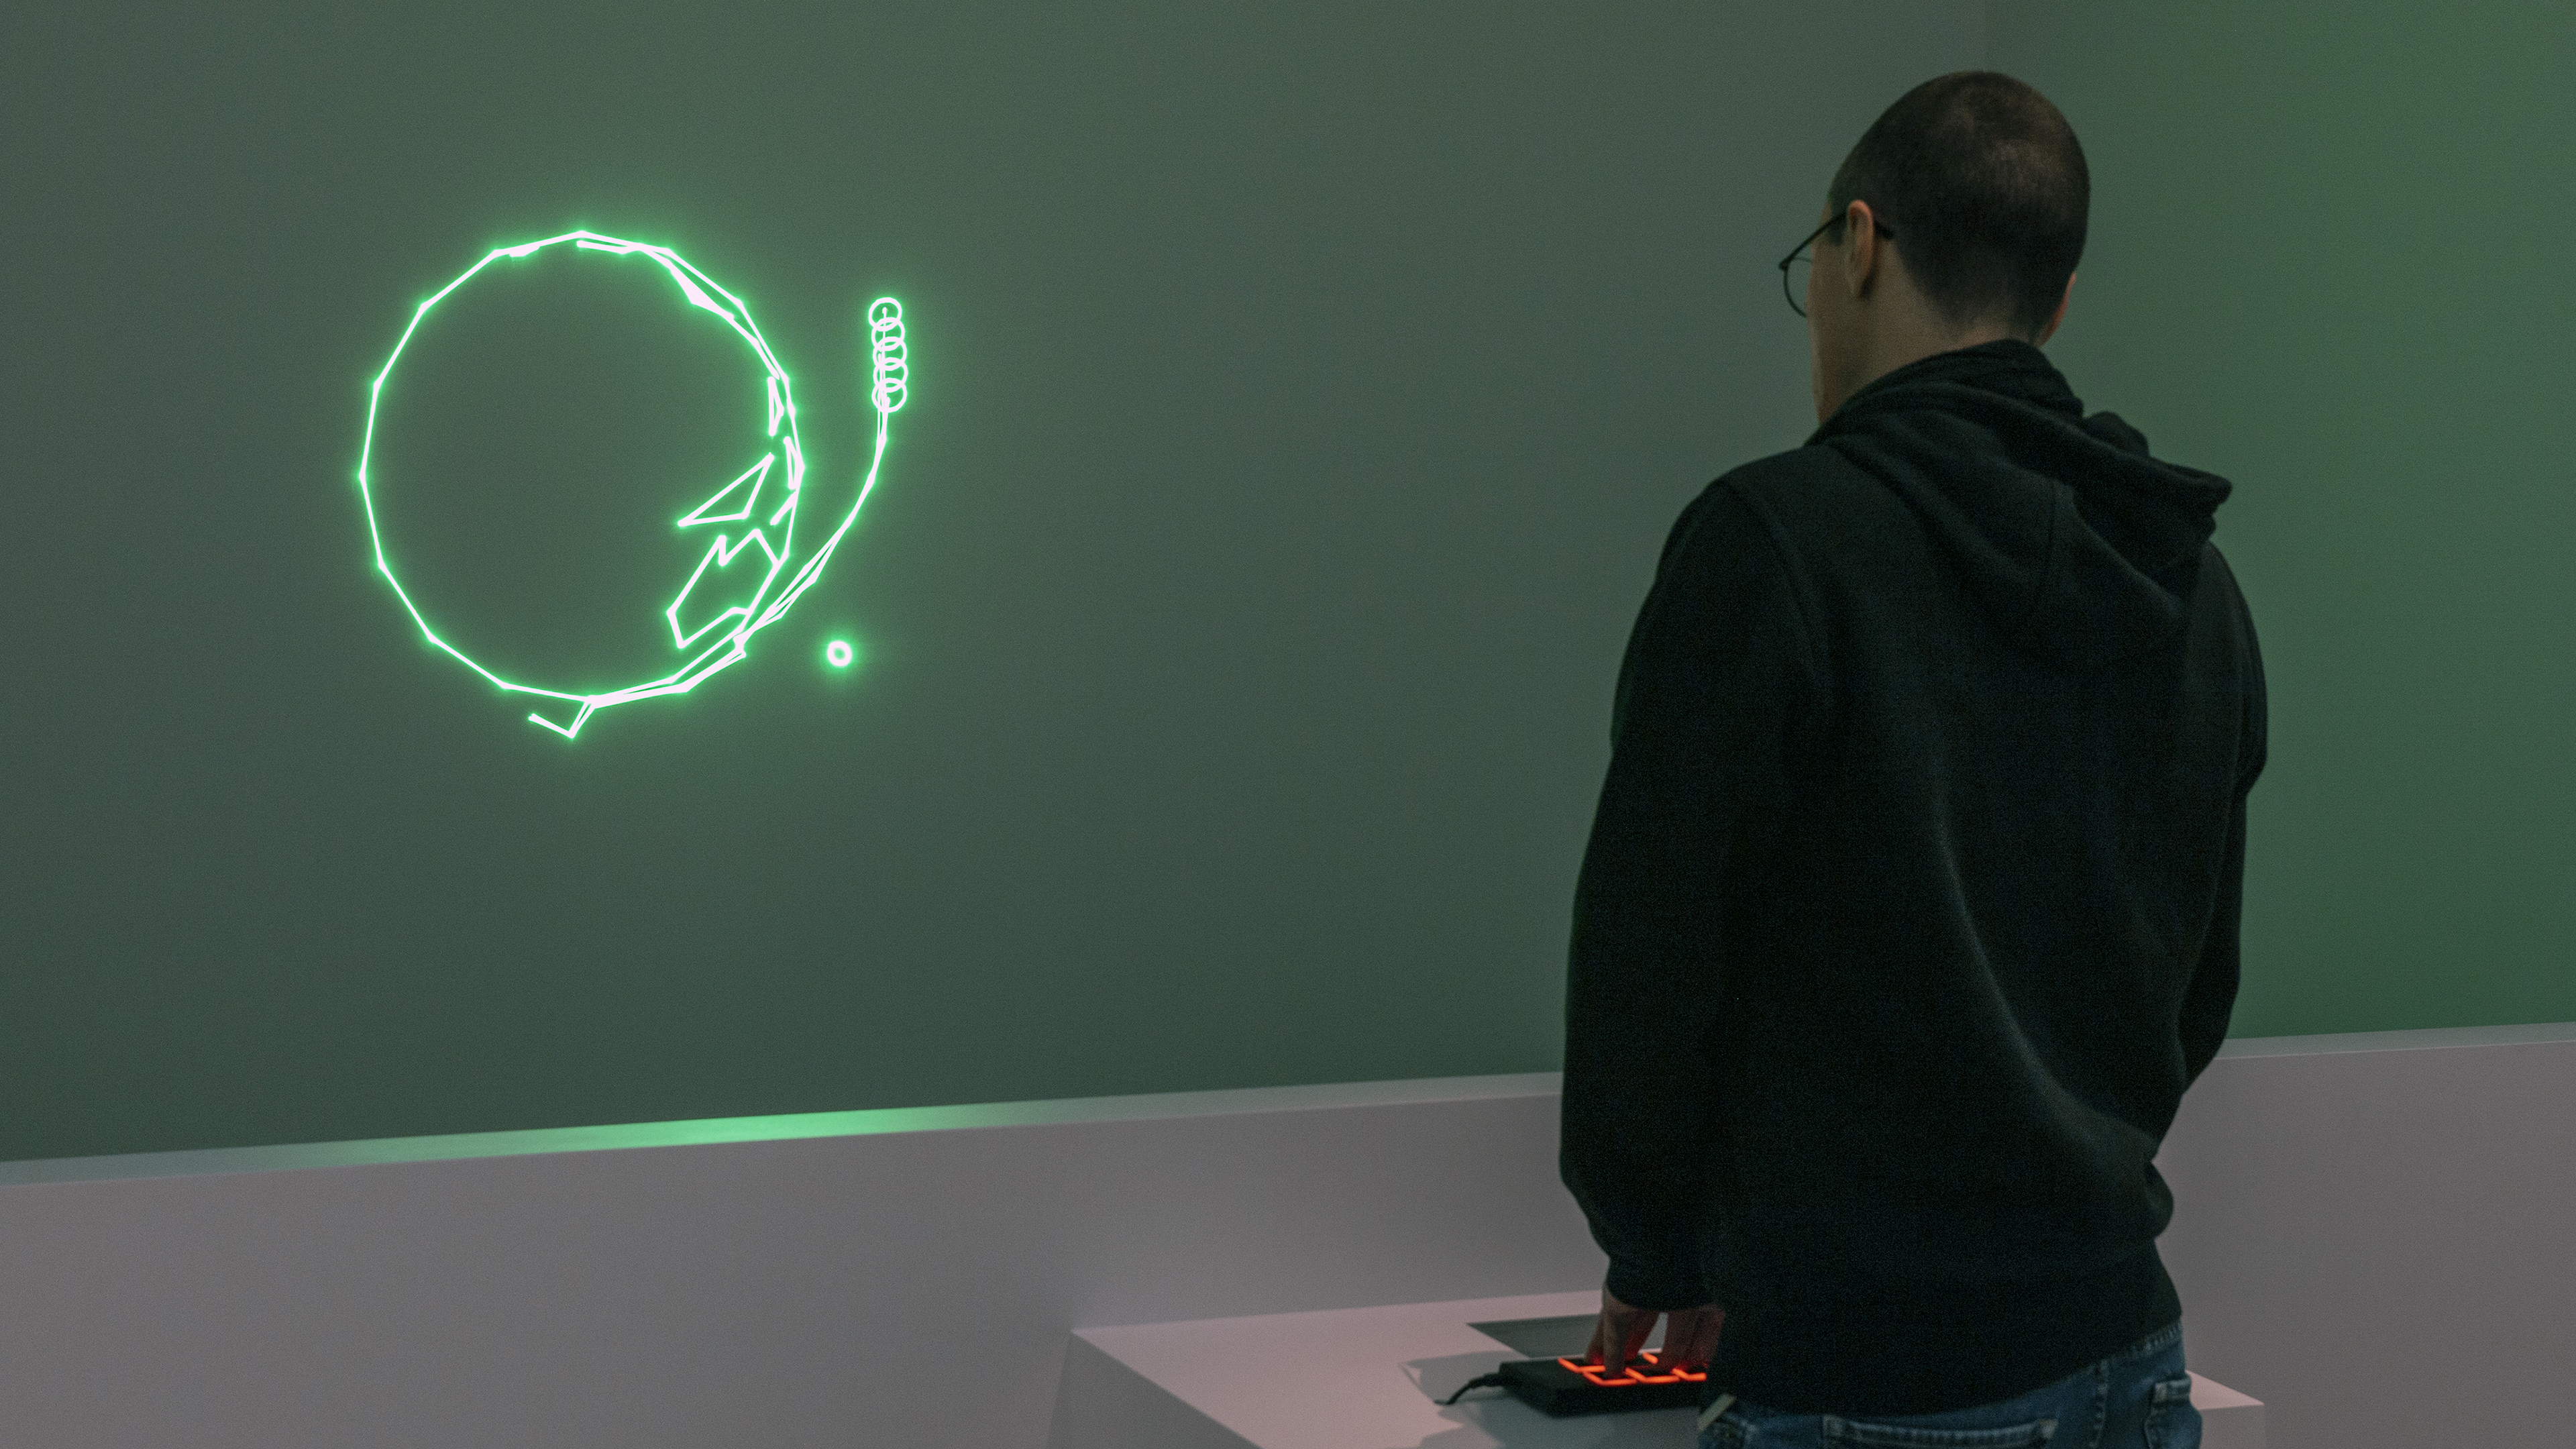 A person pressing buttons in front of a jittery green laser image of earth with a circle in its orbit.